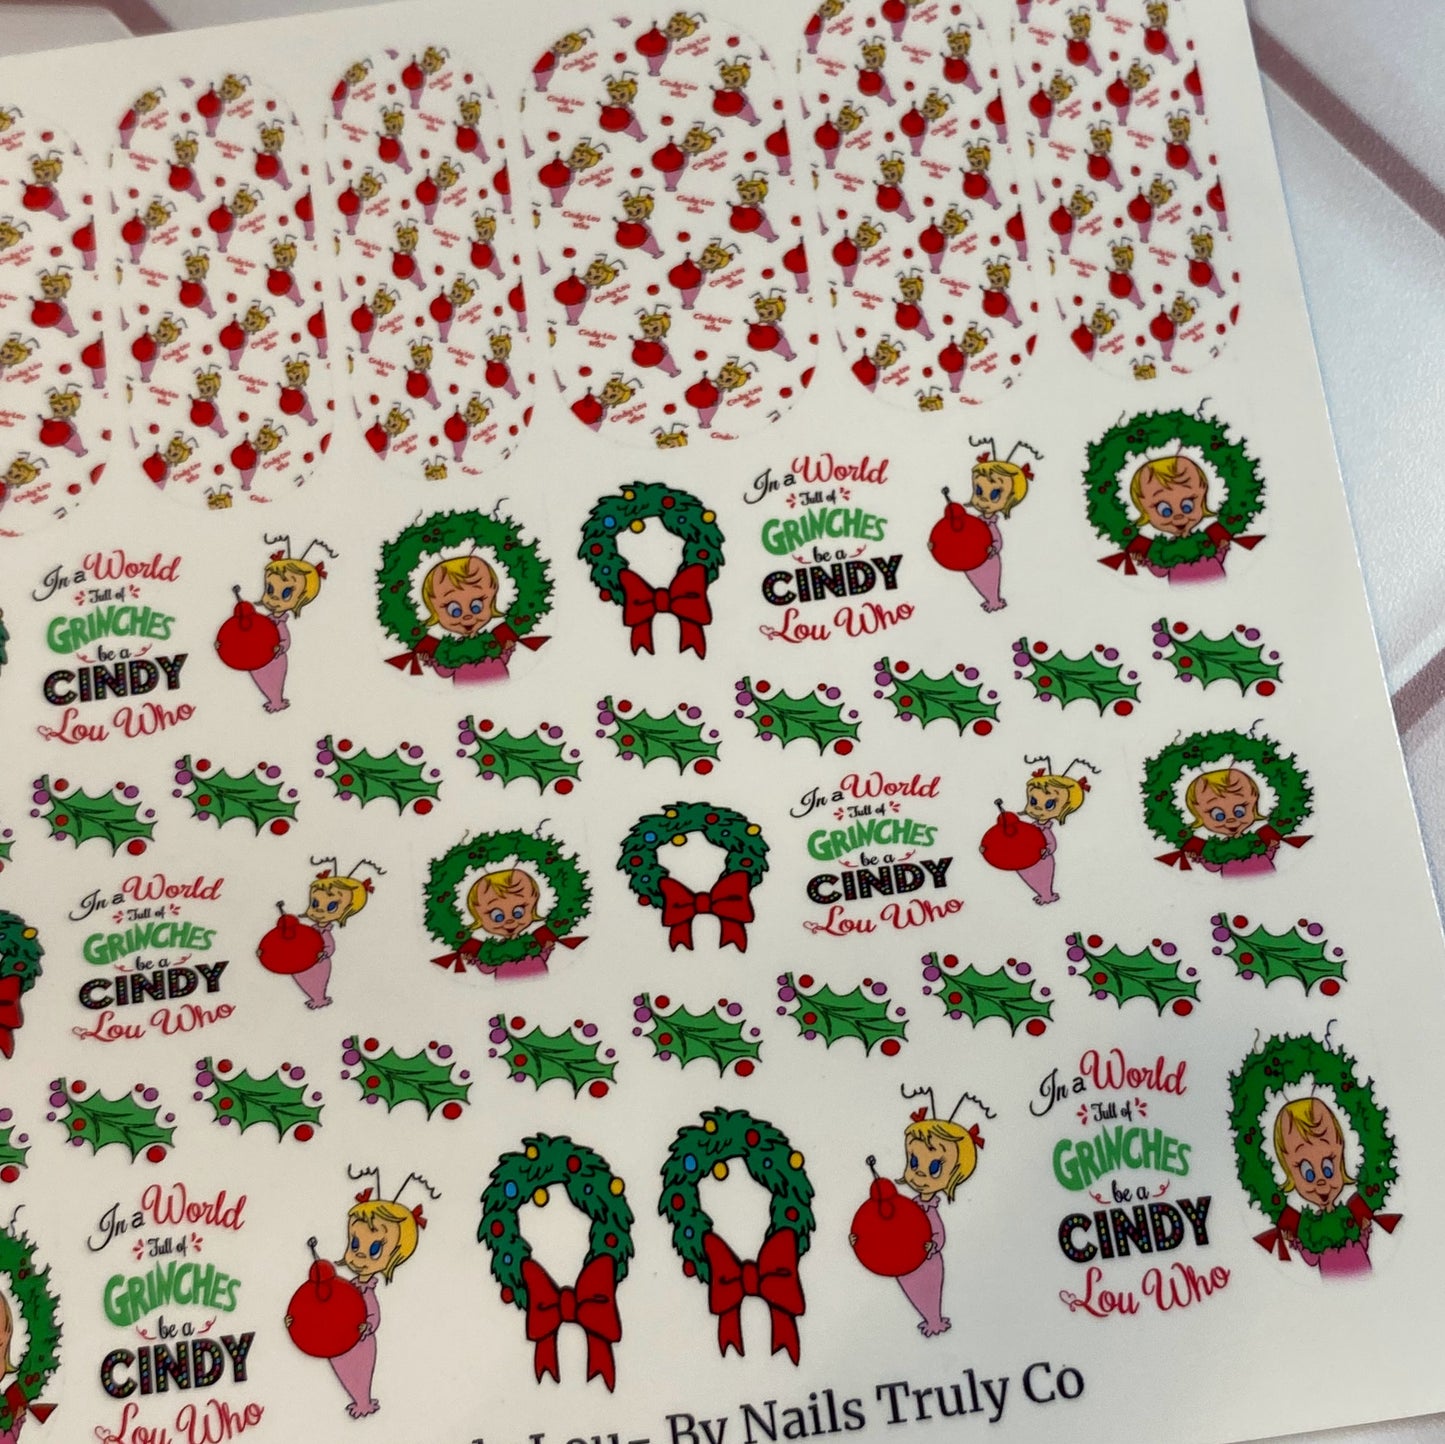 Be A Cindy Lou - Christmas Nail Art Decals